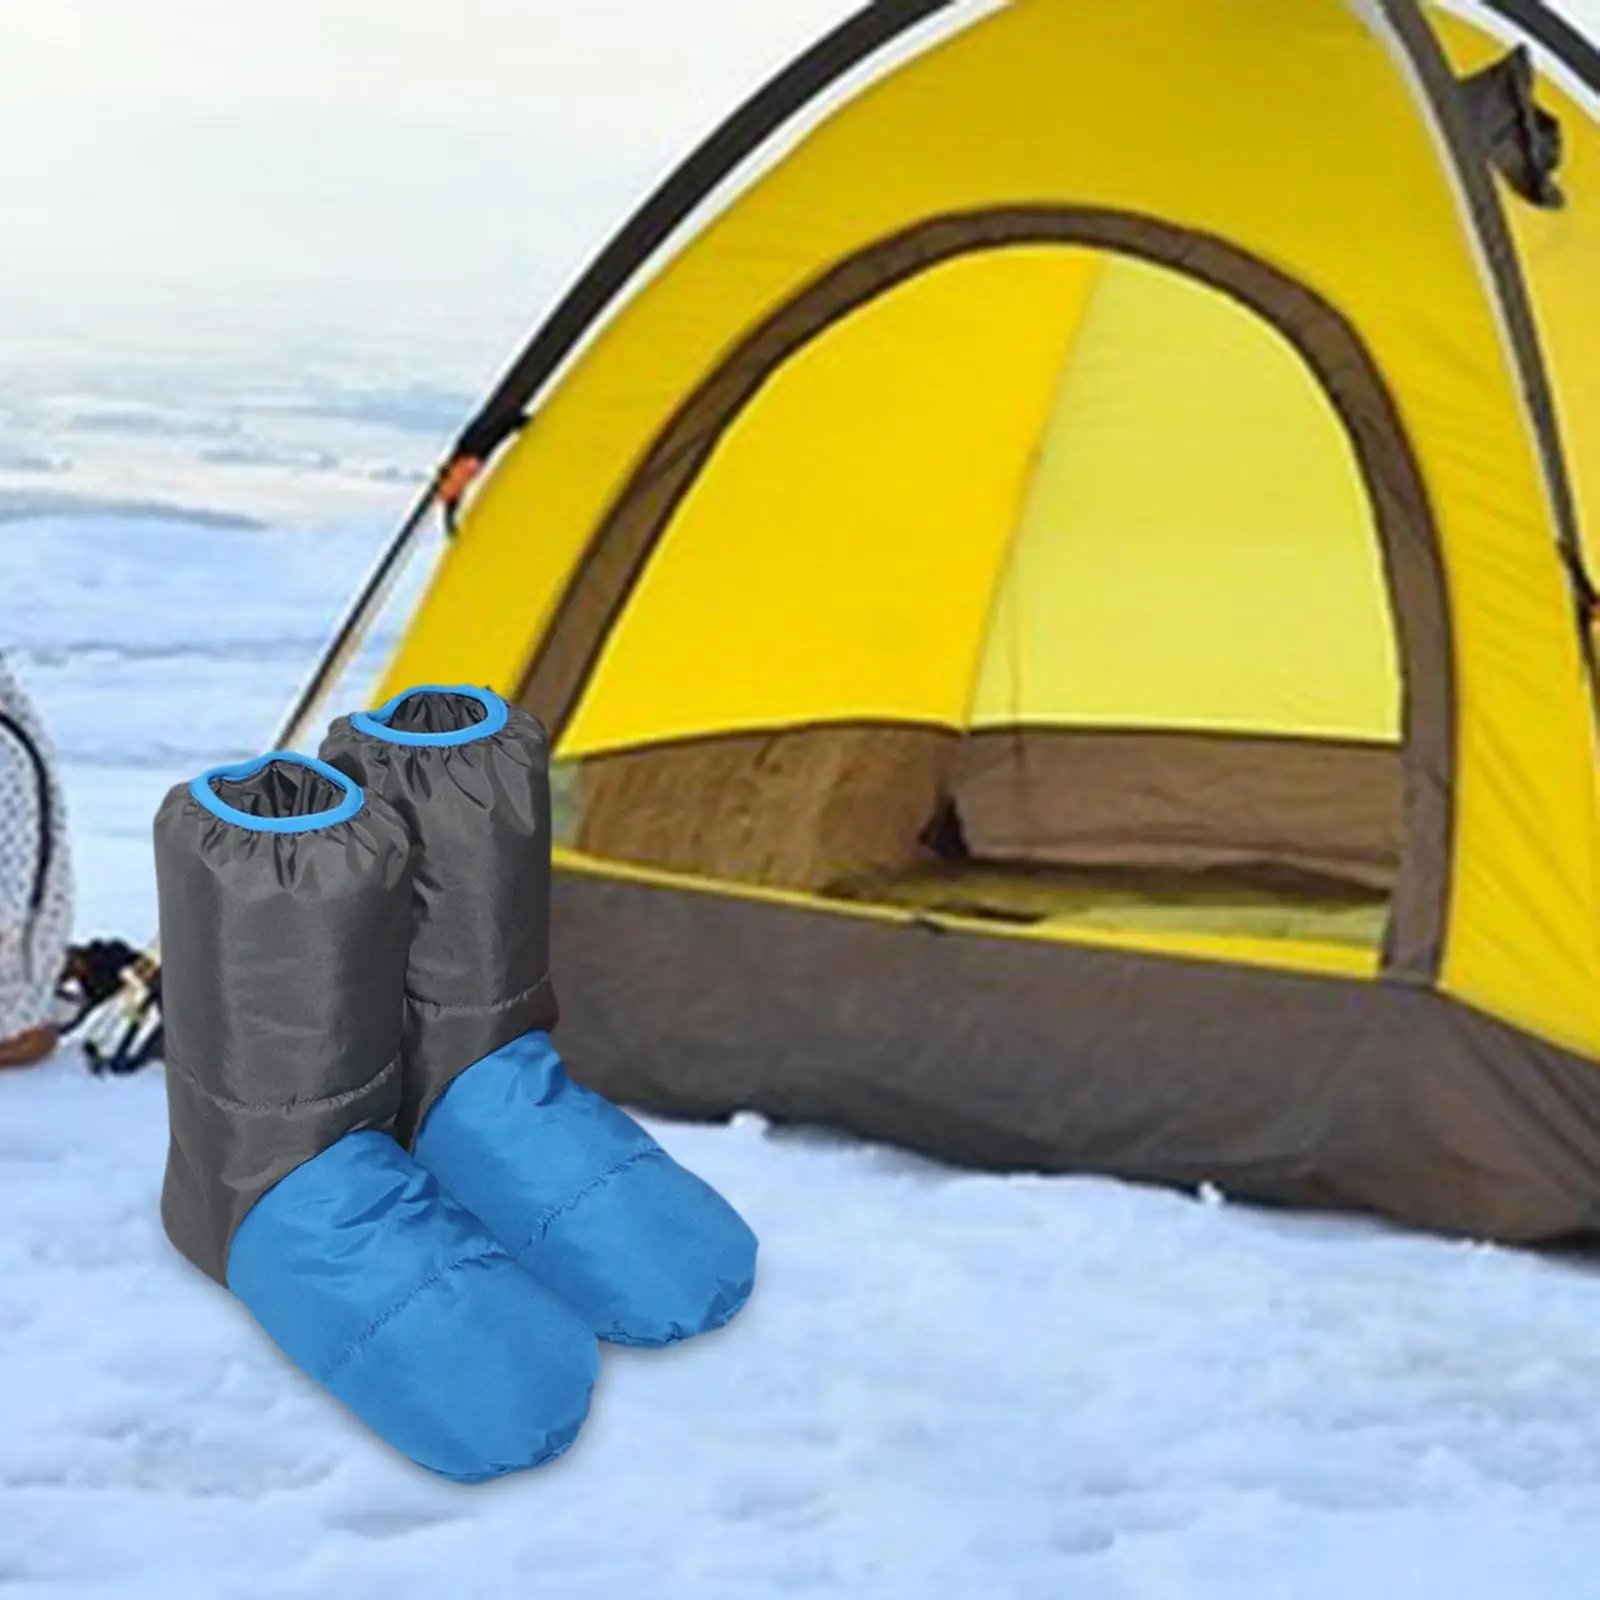 Down Booties Winter Warm Socks Shoes Foot Sock Footwear Sleeping Slippers Down Boots for Camping Bed Adults Sleeping Bag Tent